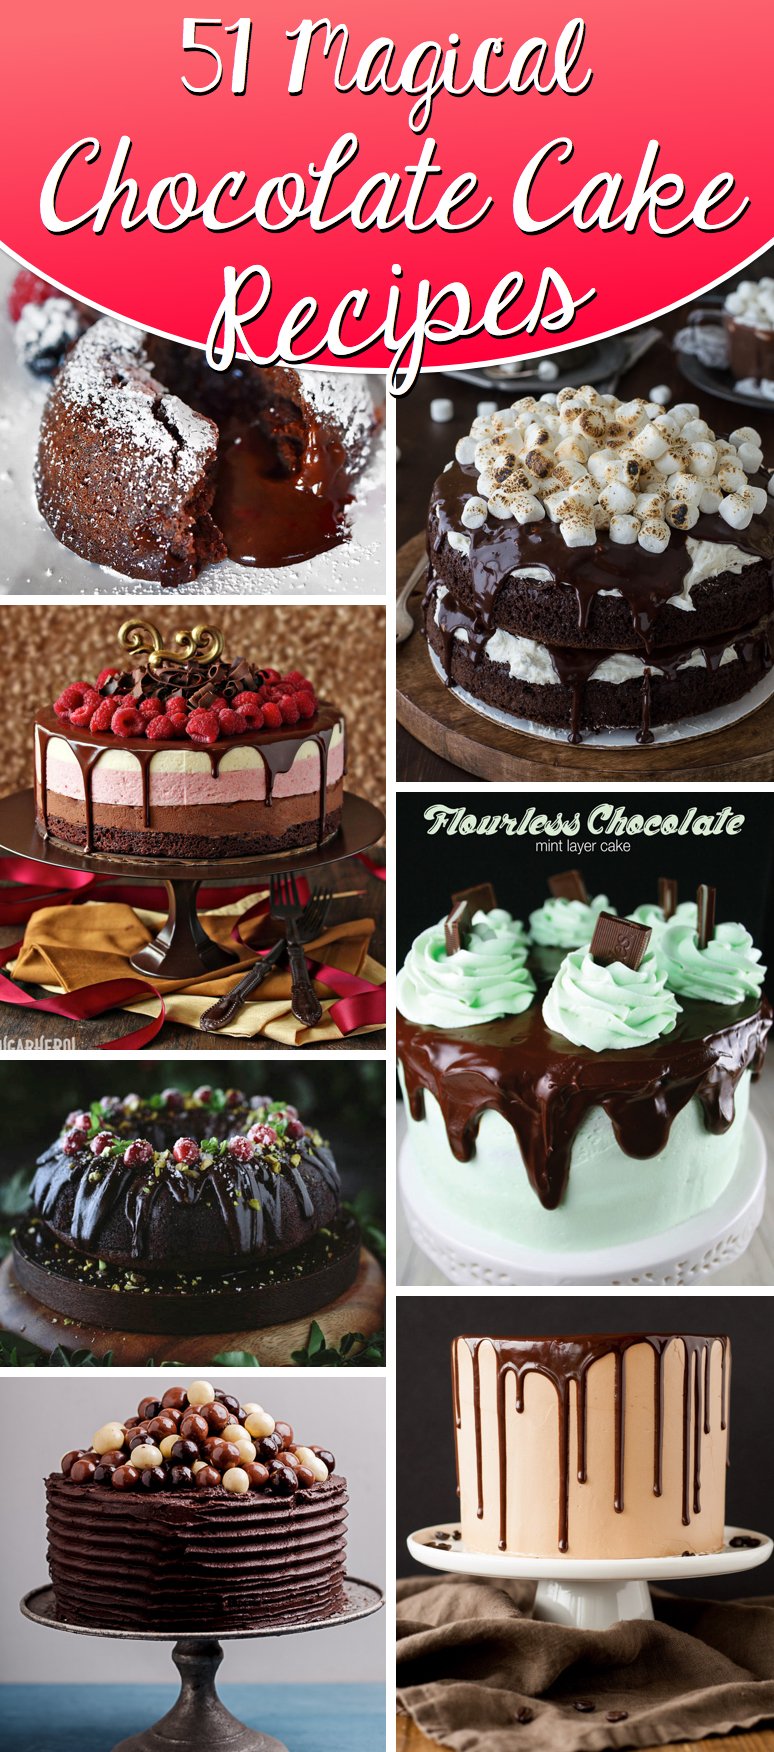 51 Magical Chocolate Cake Recipes that are Synonymous To Delicious!